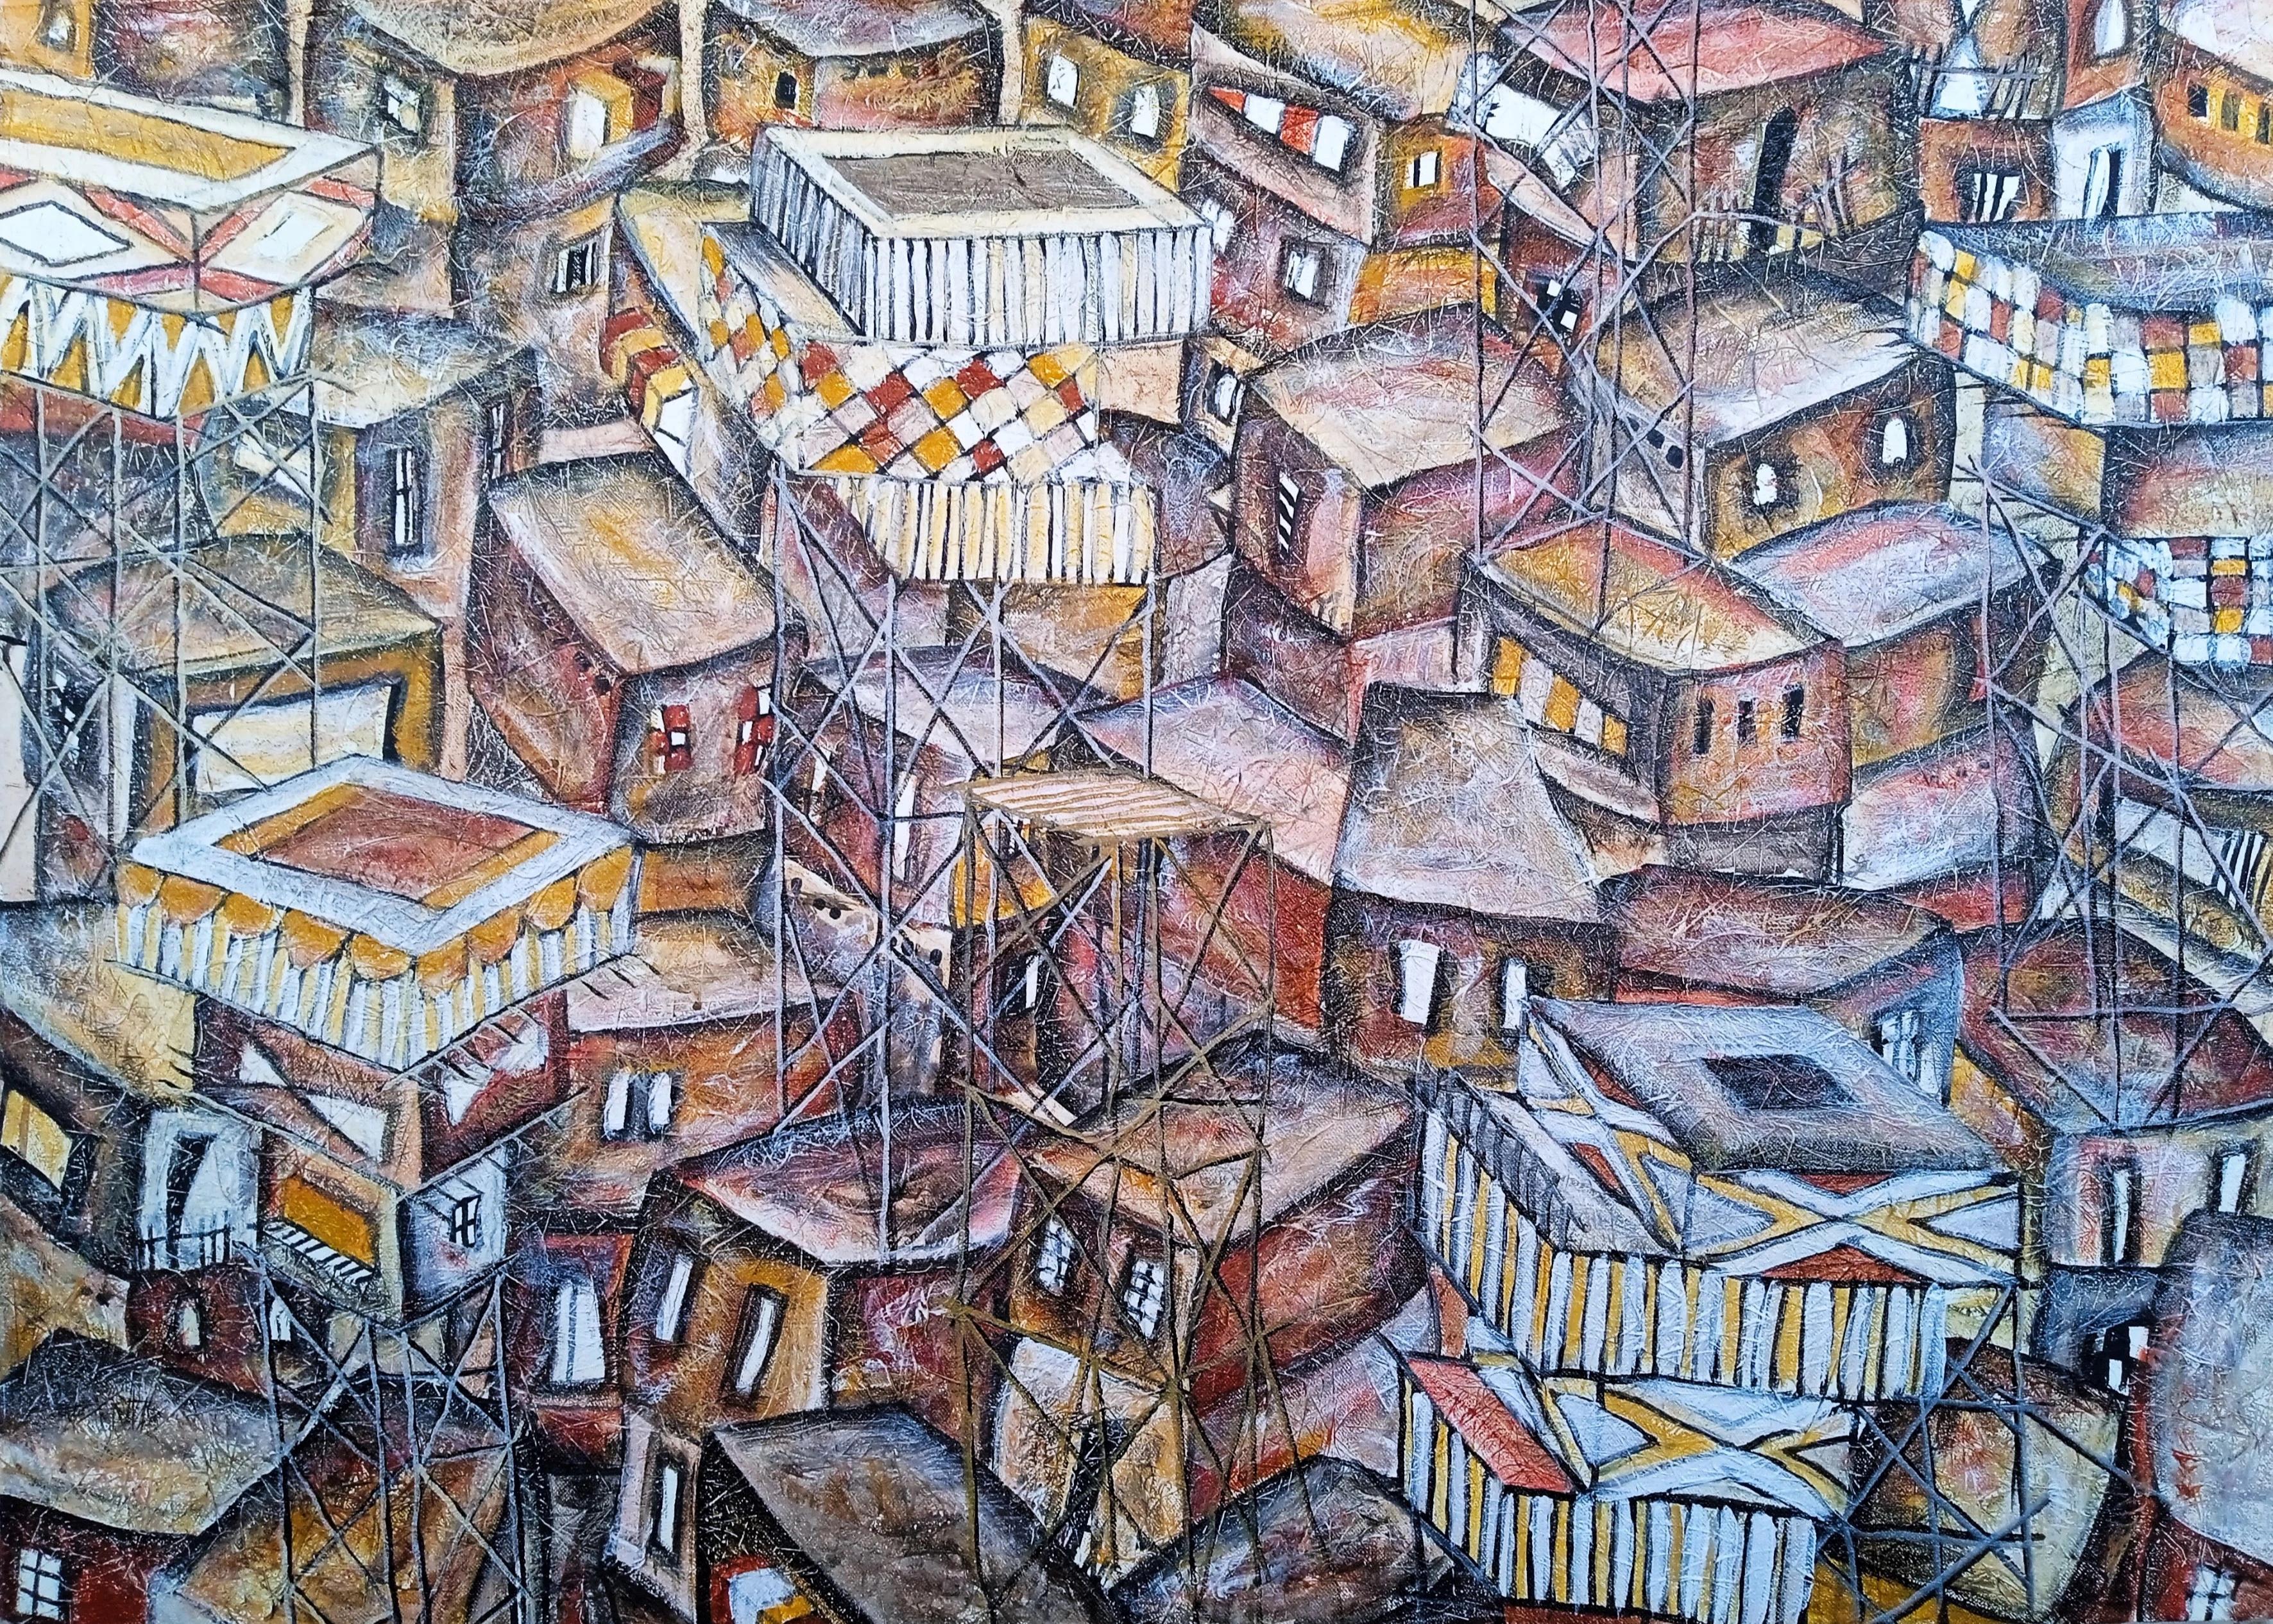 MOHAMED HUSSEIN Abstract Painting - "Above the City II" Painting 33" x 47" inch by Mohamed Hussein